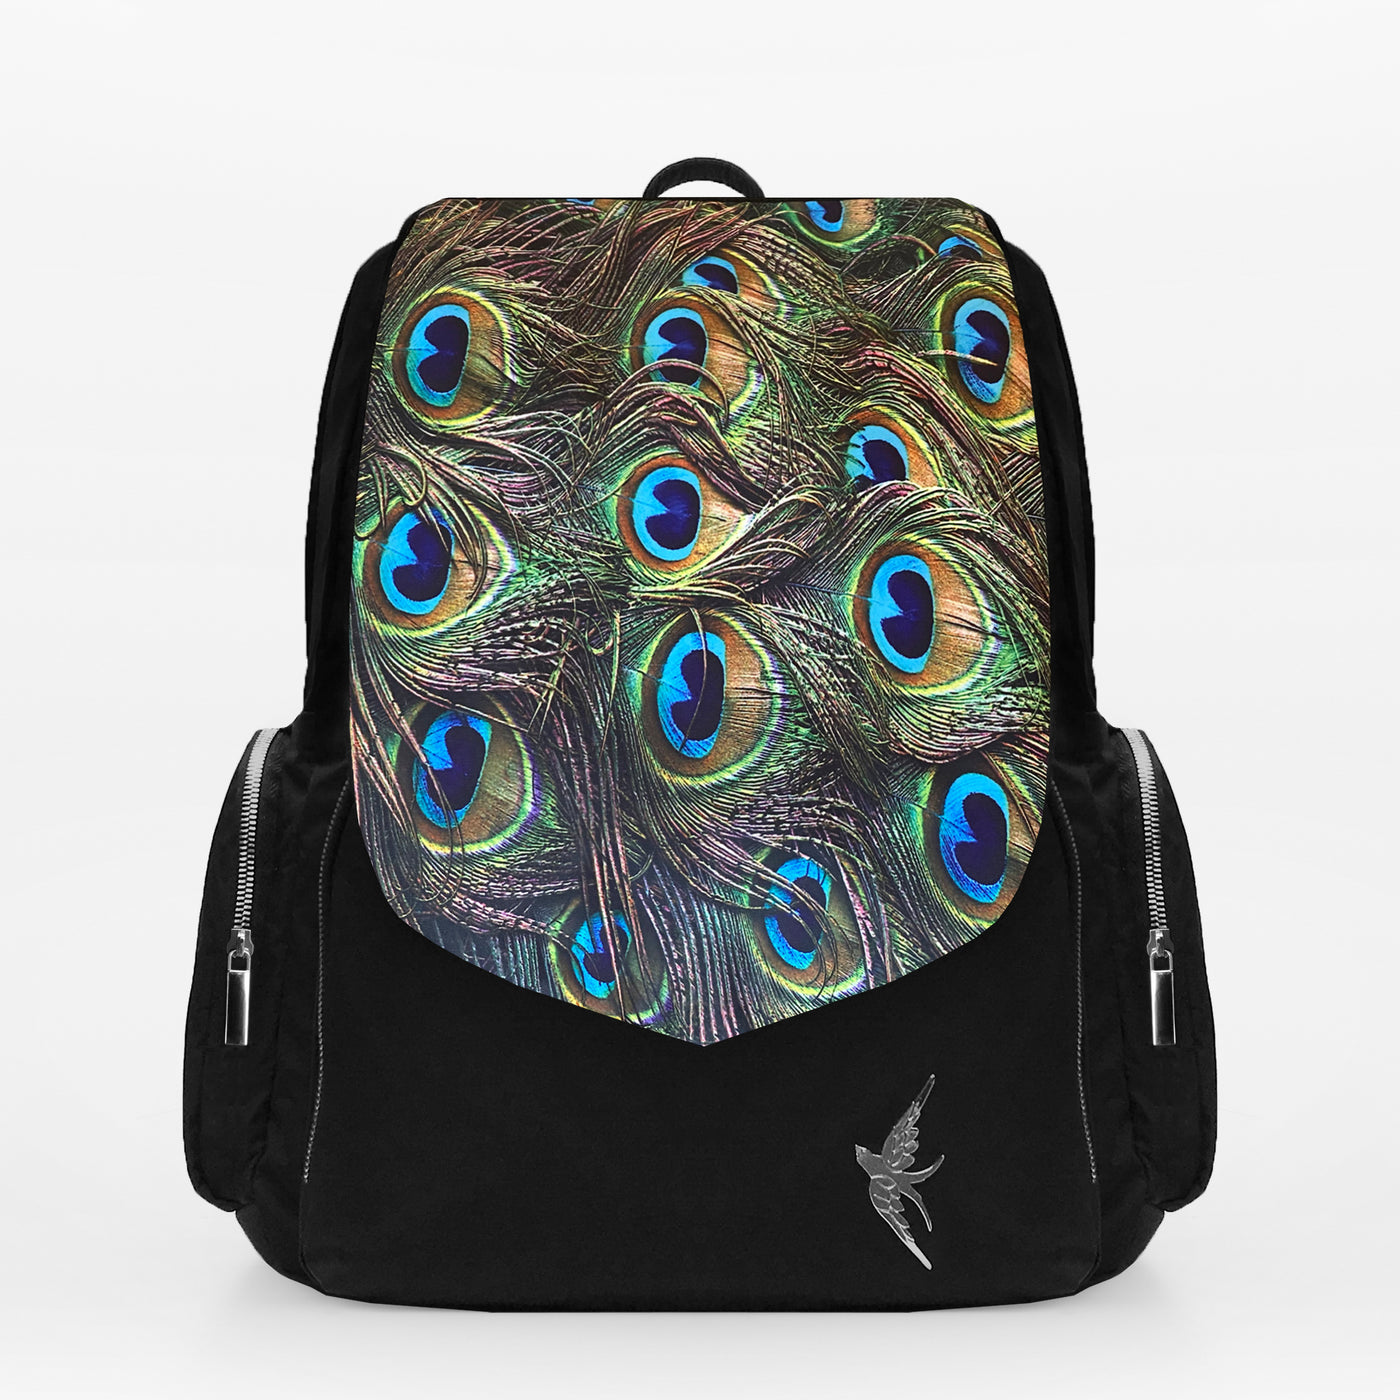 Laptop Backpack with the Emerald Peacock Print